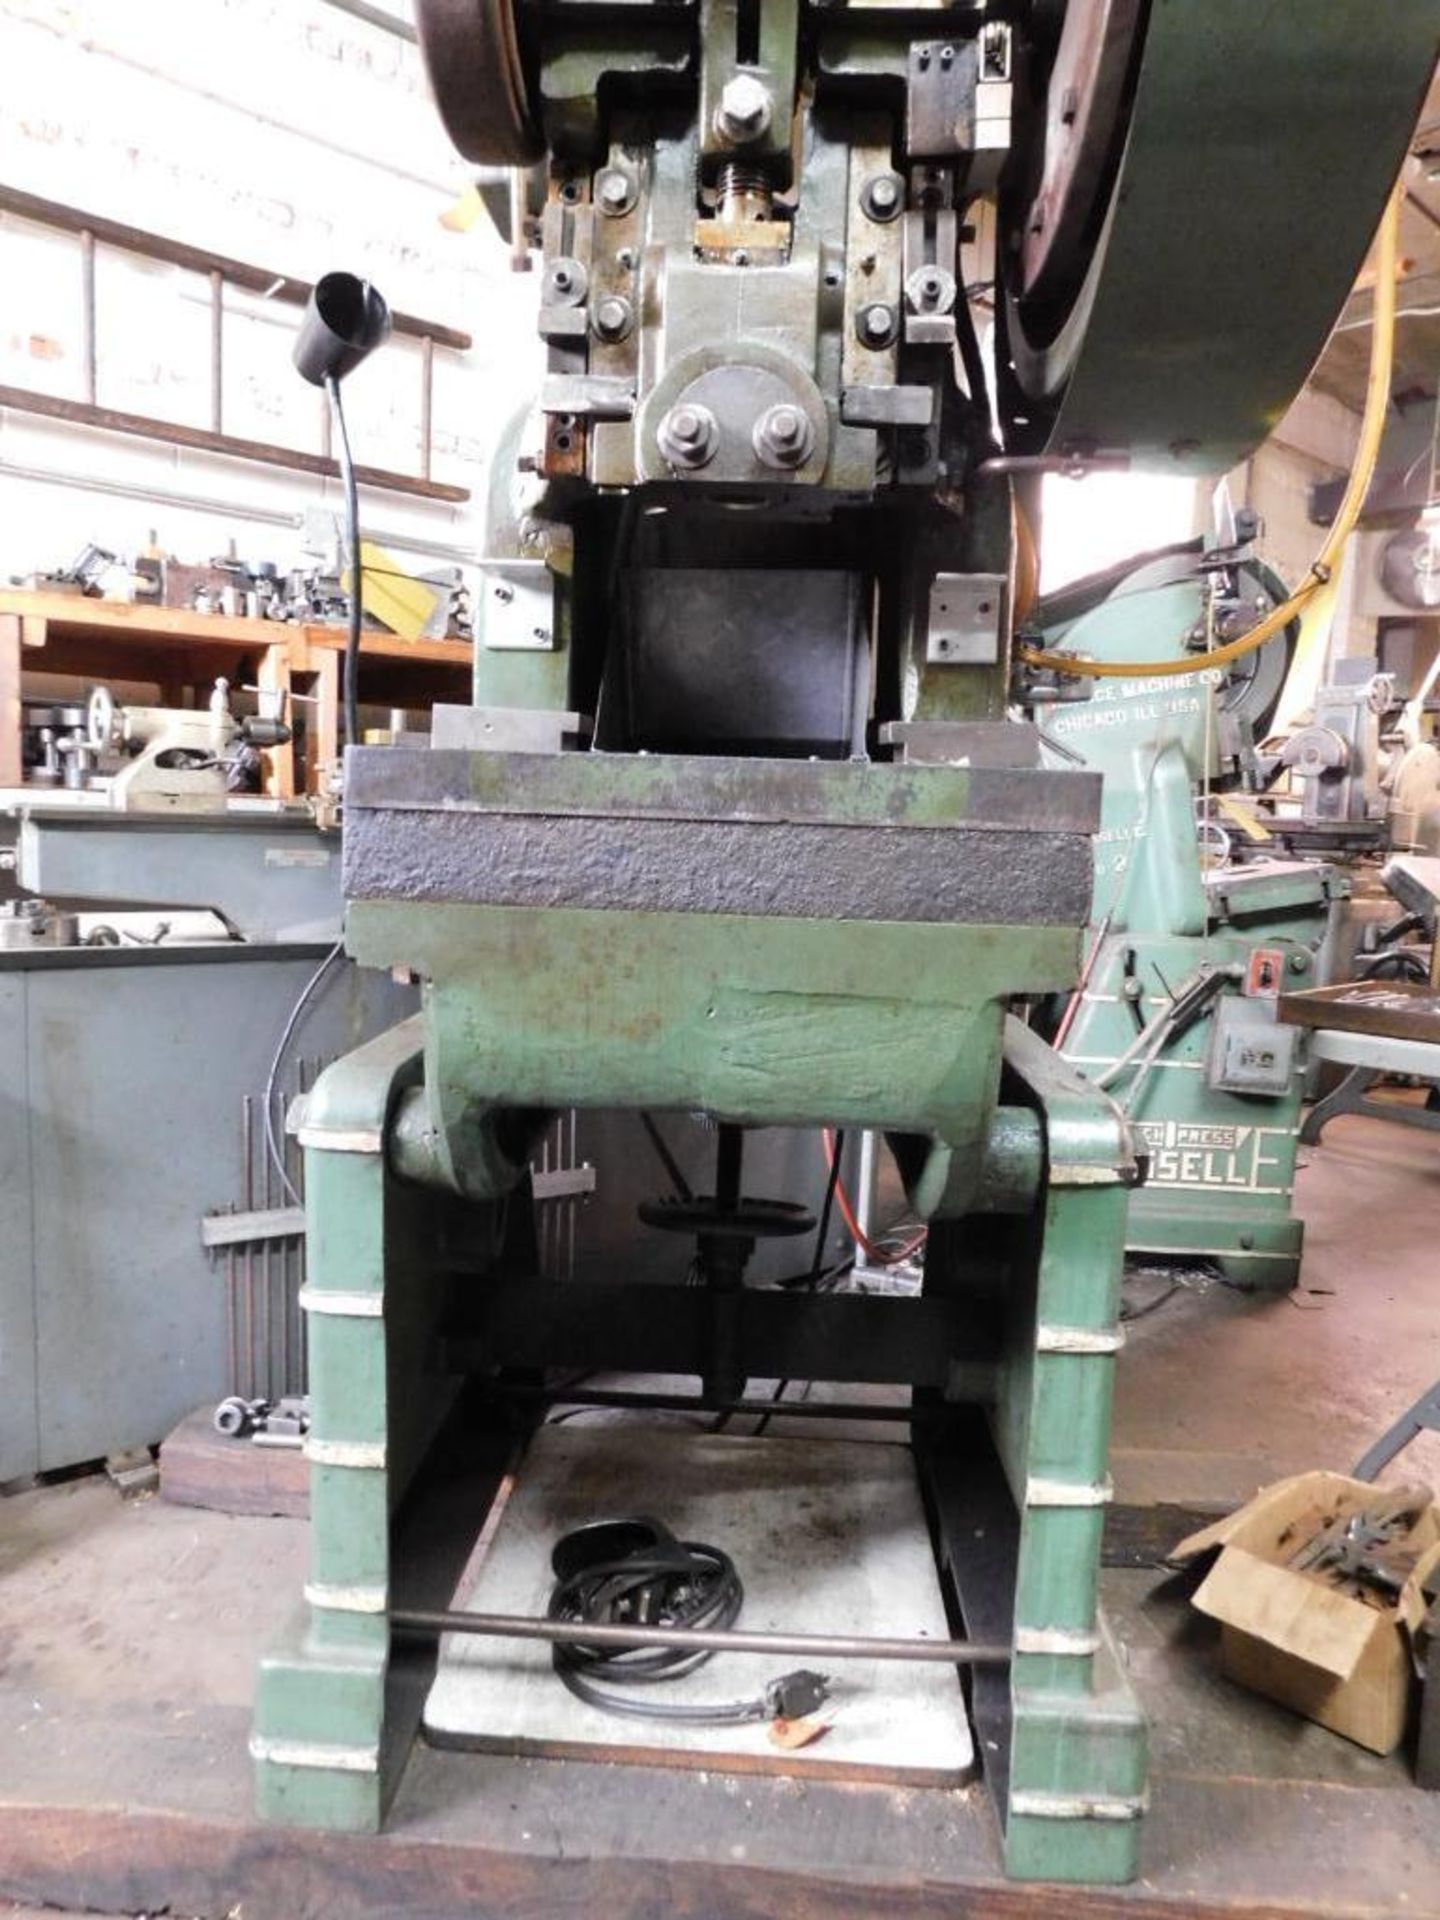 Rousselle No. 3 25-Ton OBI Air Clutch Punch Press. 2" Stroke, 7.75" Shut Height, 20"x14" Bolster Pla - Image 7 of 11